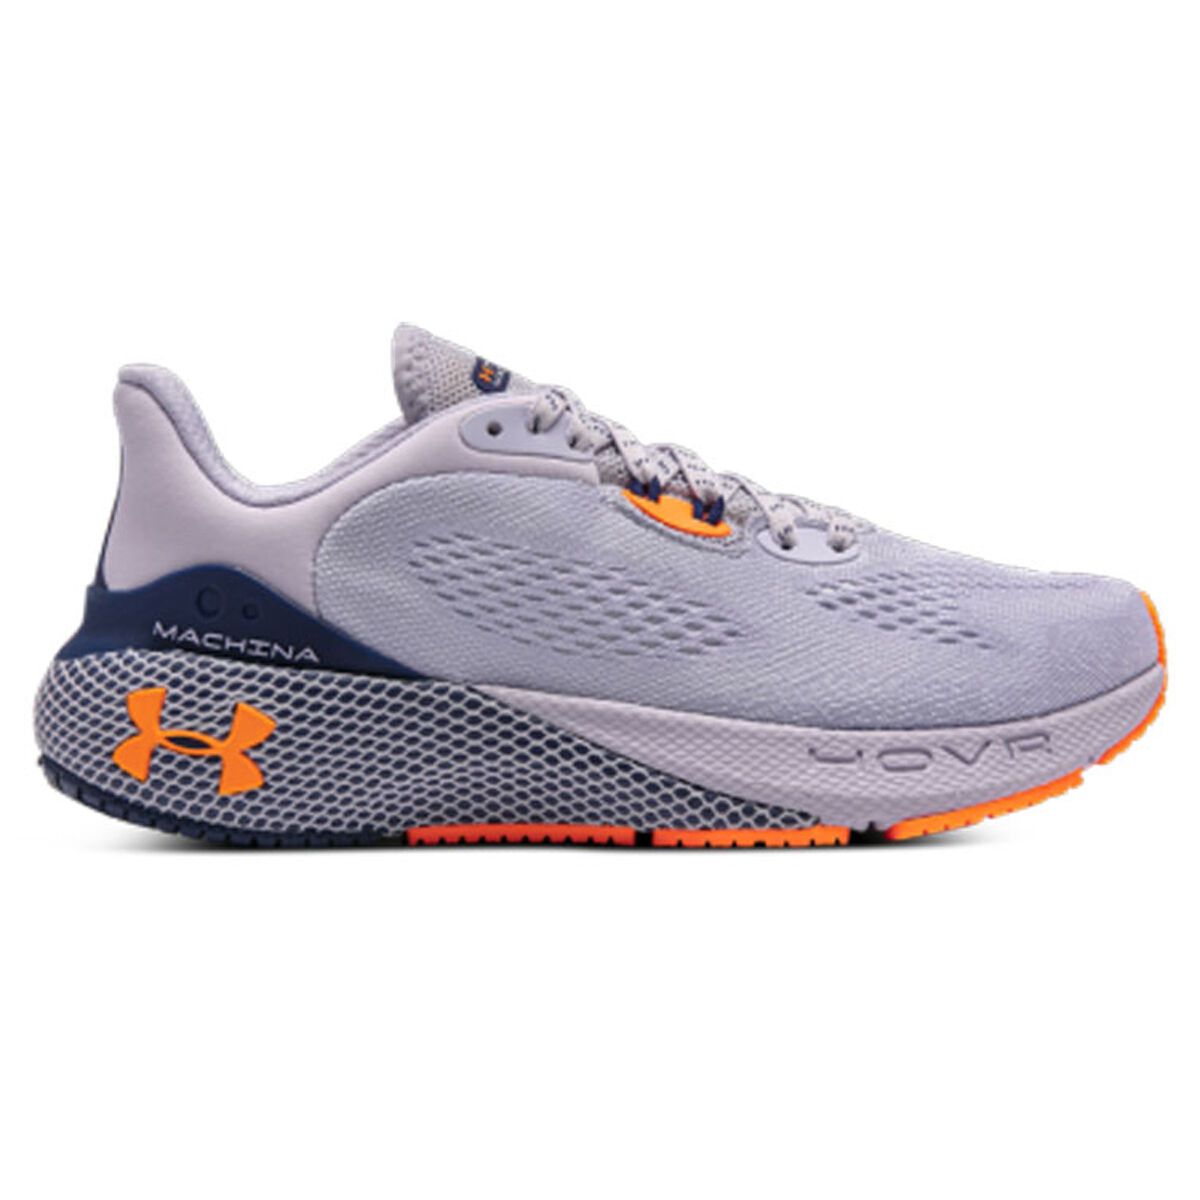 Under Armour HOVR Machina 3 Womens Running Shoes Purple/Blue US 11 ...